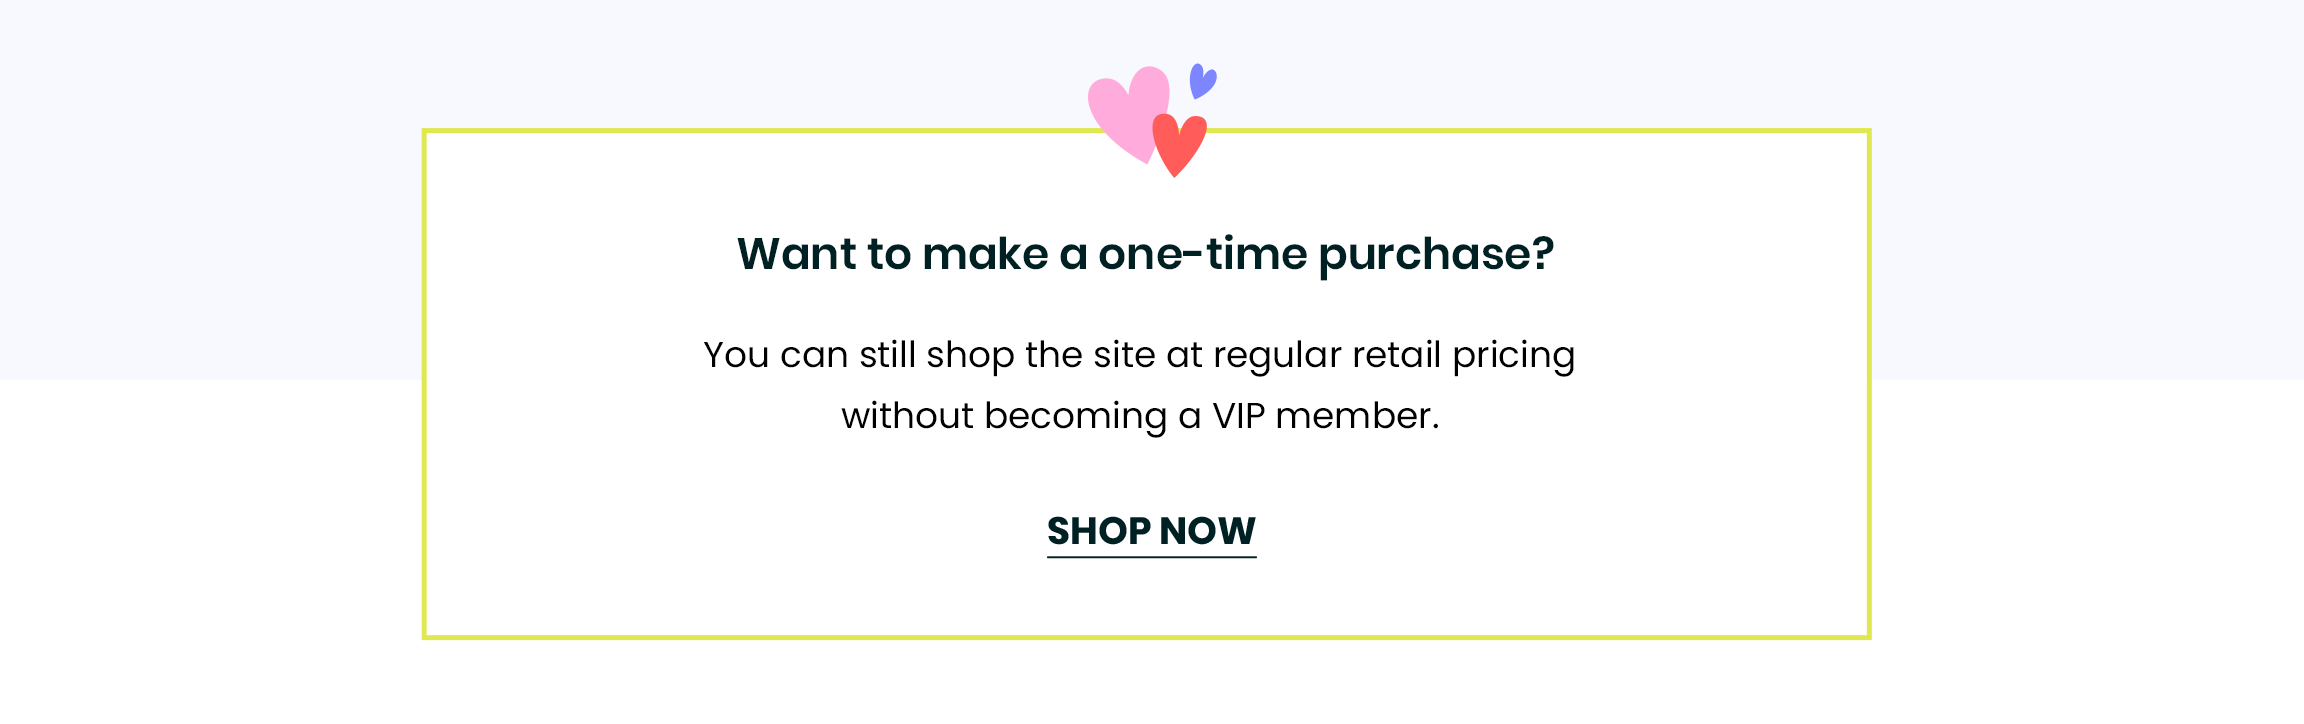 Want to make a one-time purchase? You can still shop the site at regular retail pricing without becoming a VIP member.